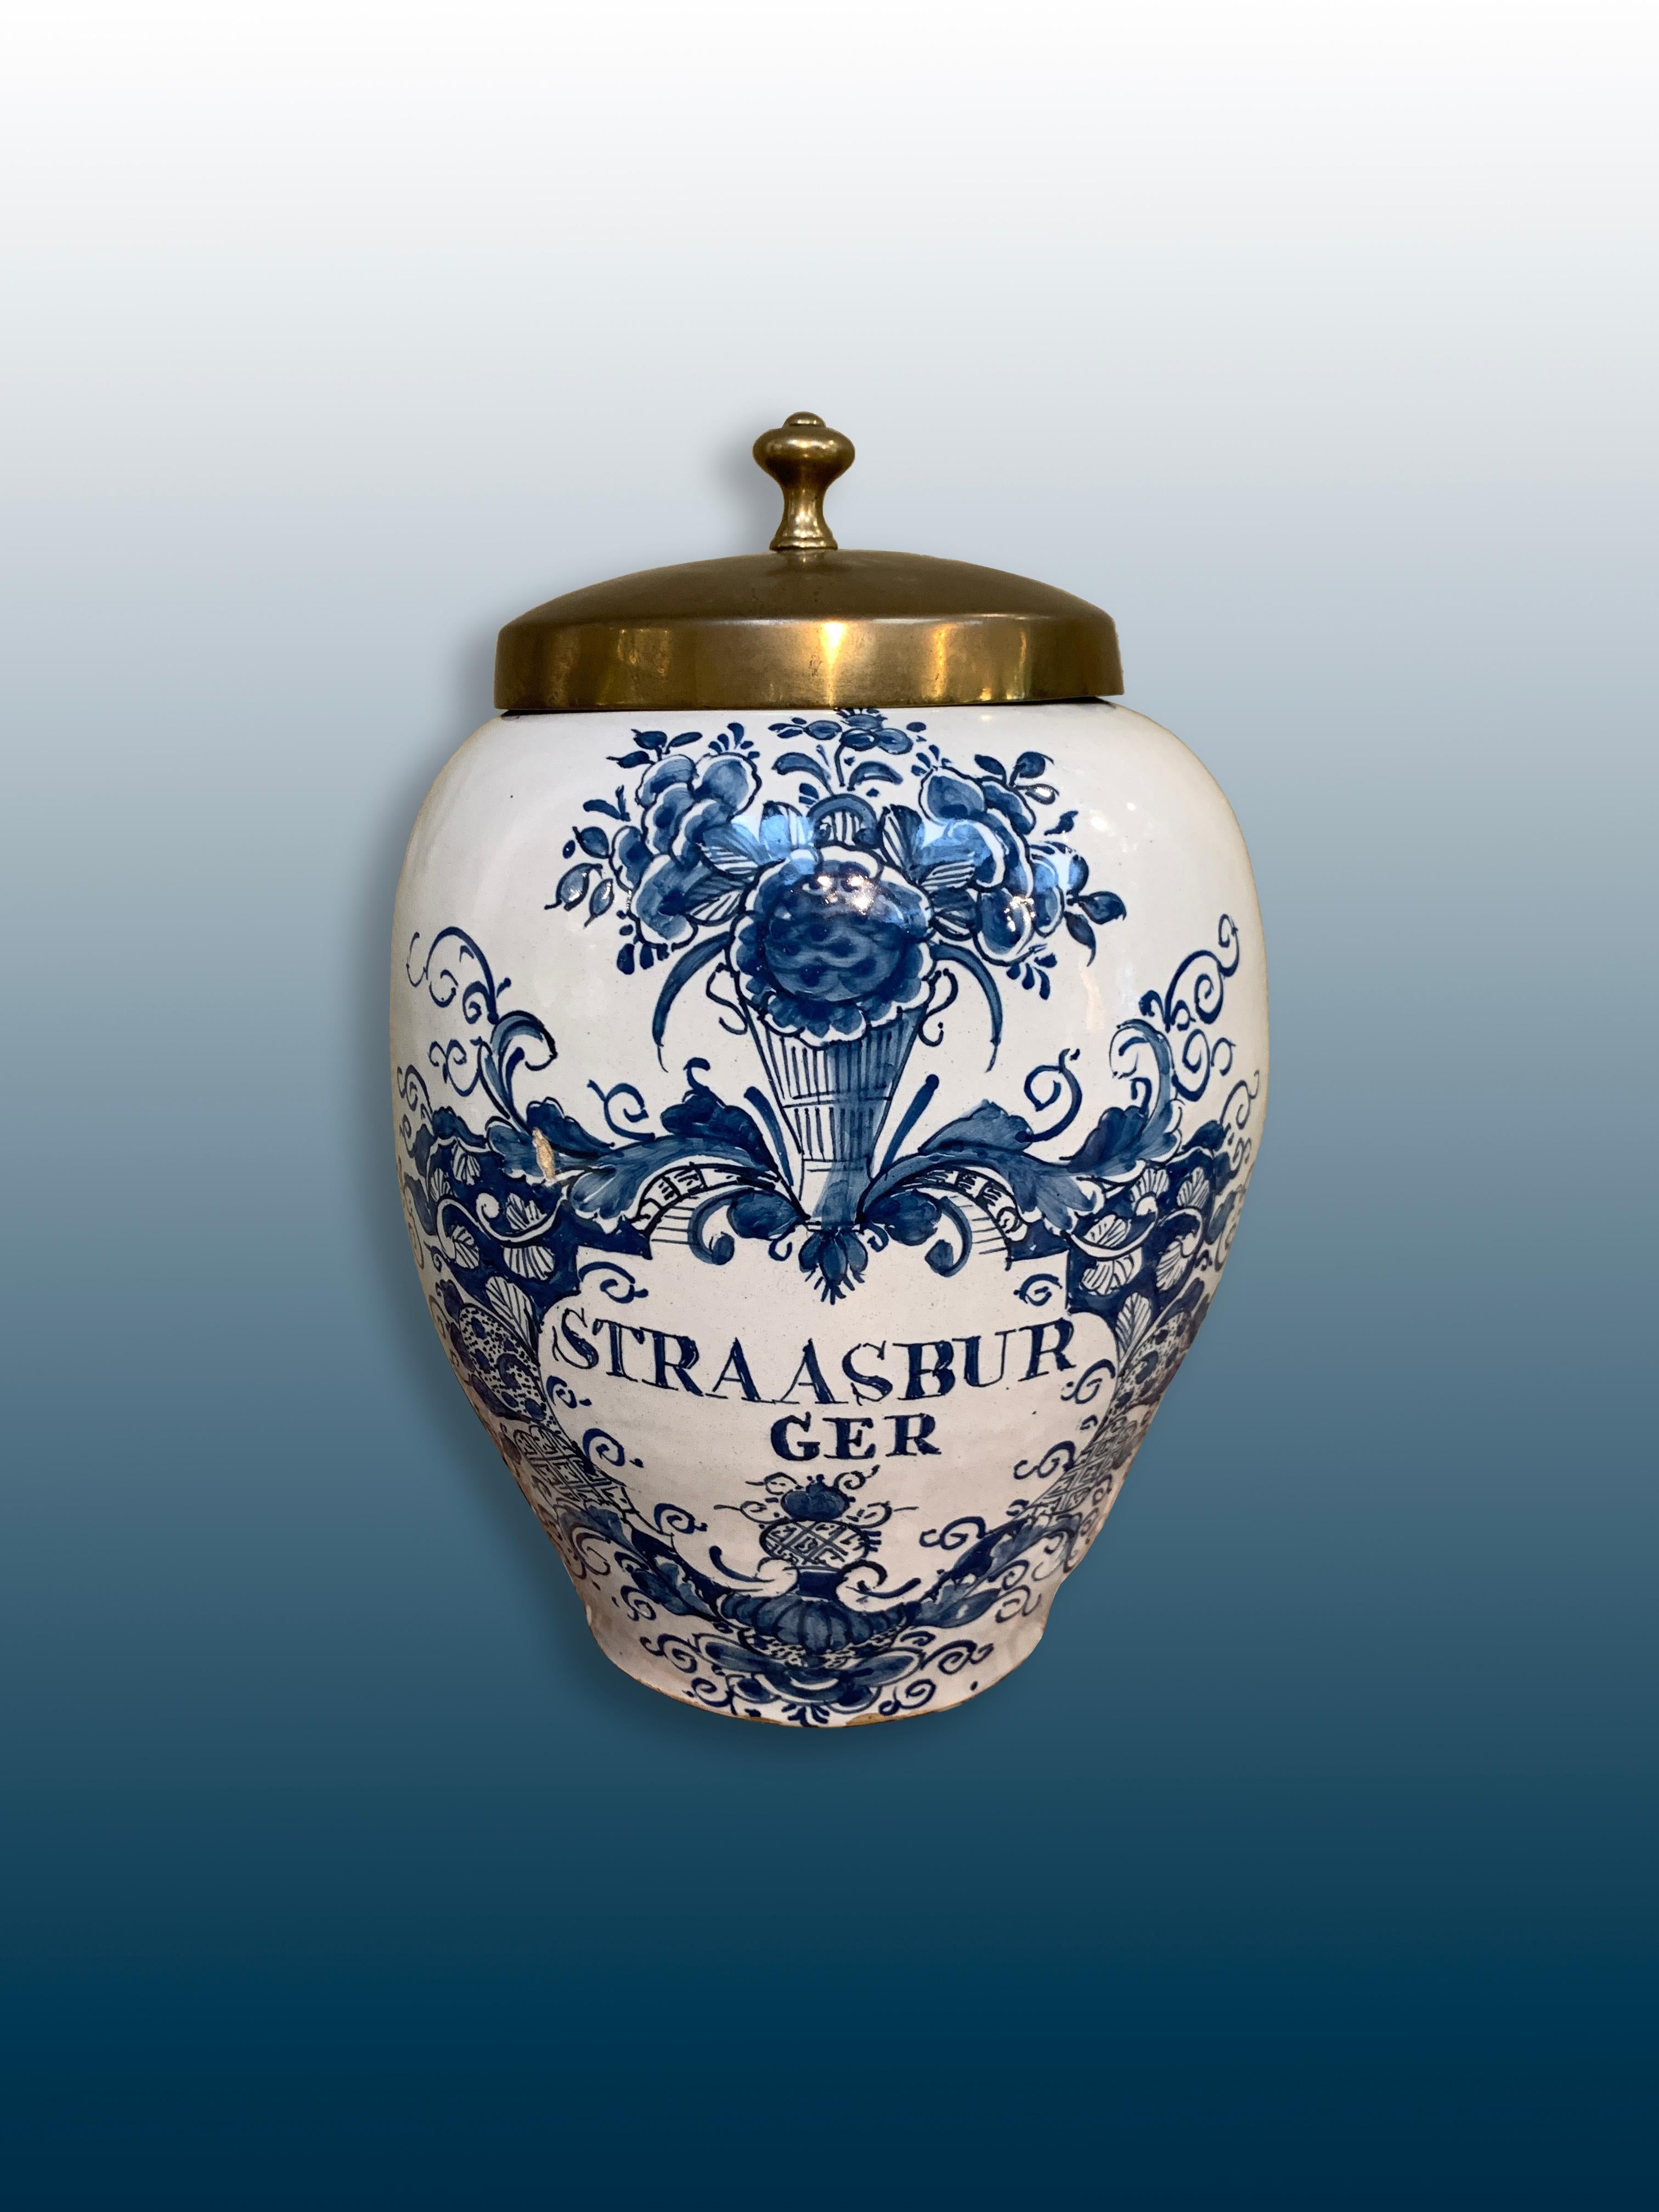 A Dutch Delftware Tobacco jar with a brass lid. 

Origine: Delft, The Netherlands
Date: Second half of the 18th century
Workshop: Unknown

A genuine blue and white tobacco jar for the storage of tobacco.
The brand name: Straasburger, is